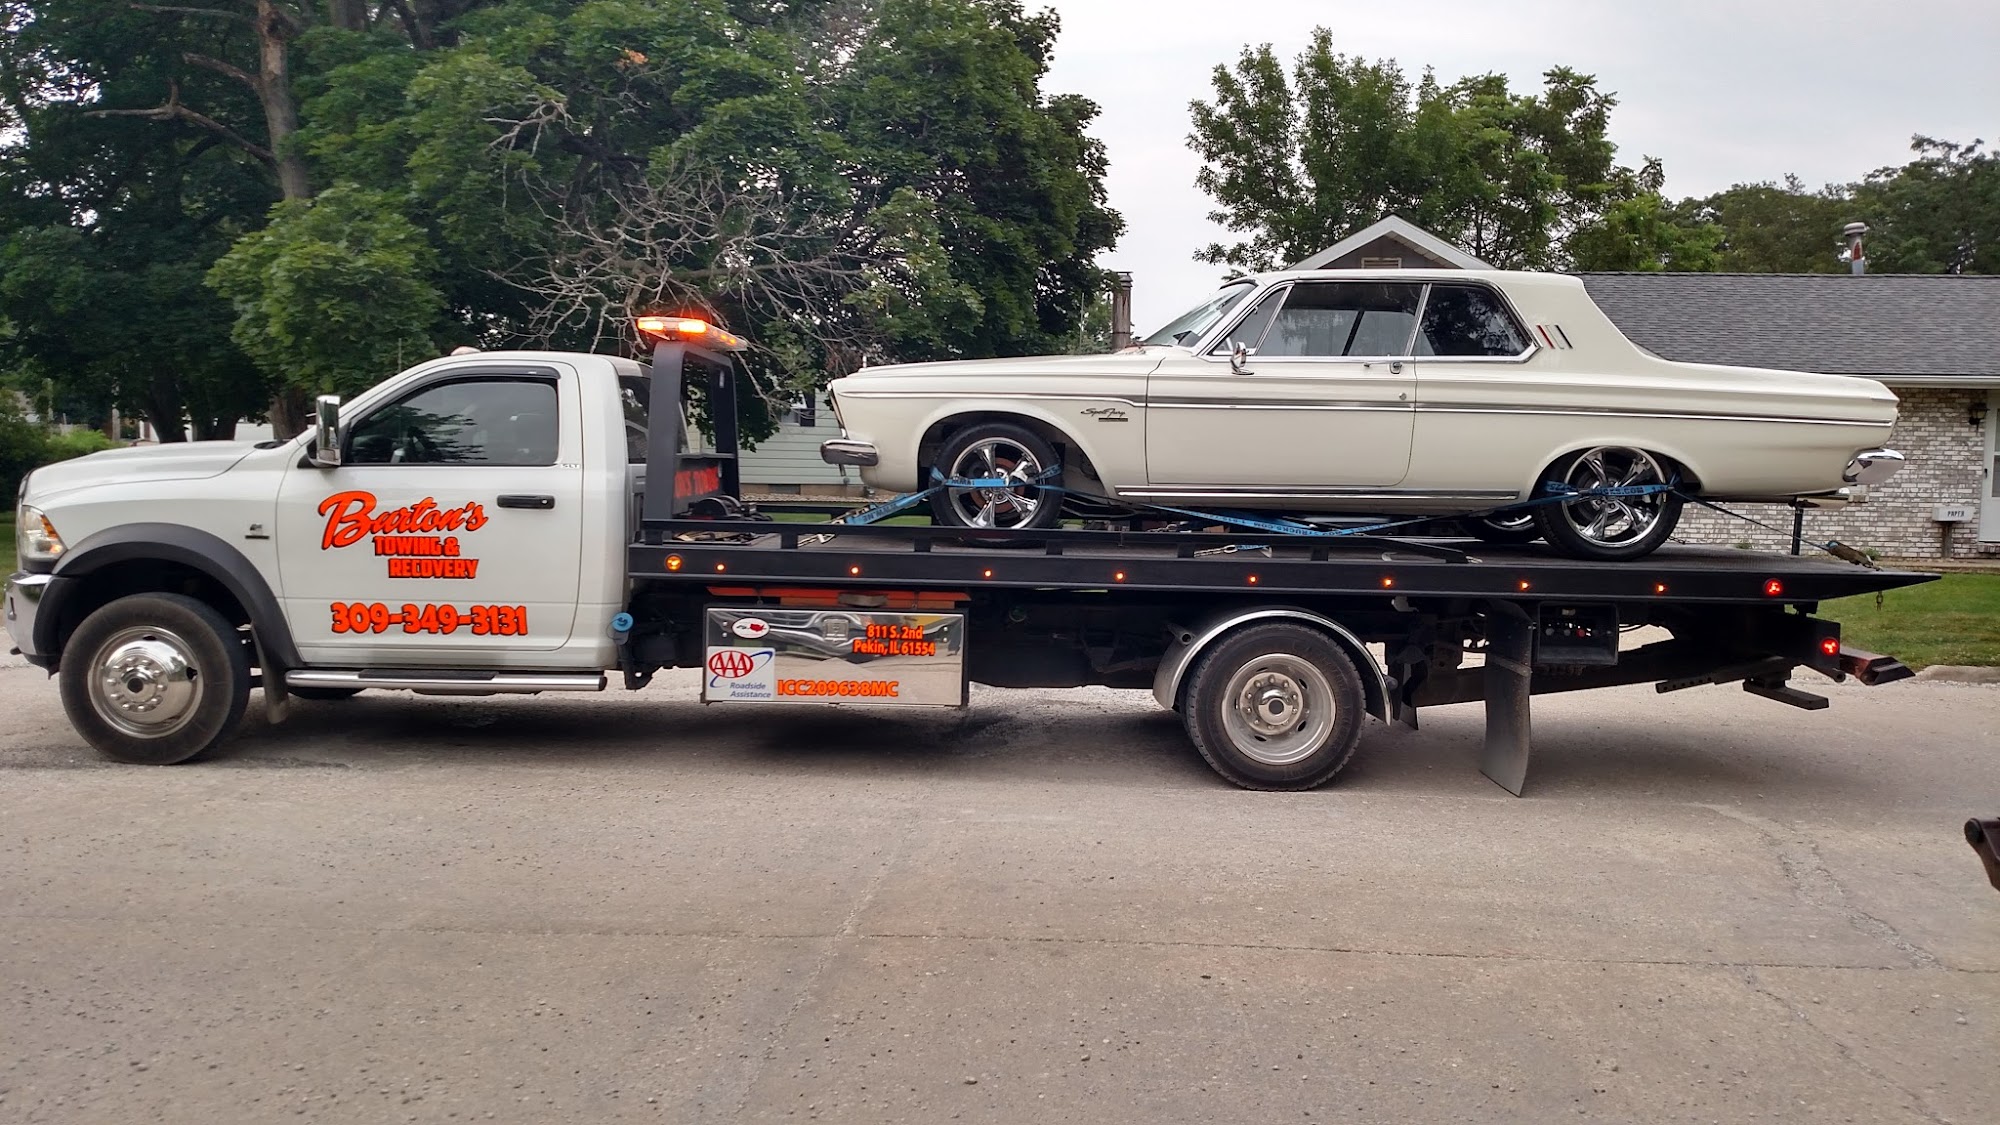 Burton's Towing & Recovery